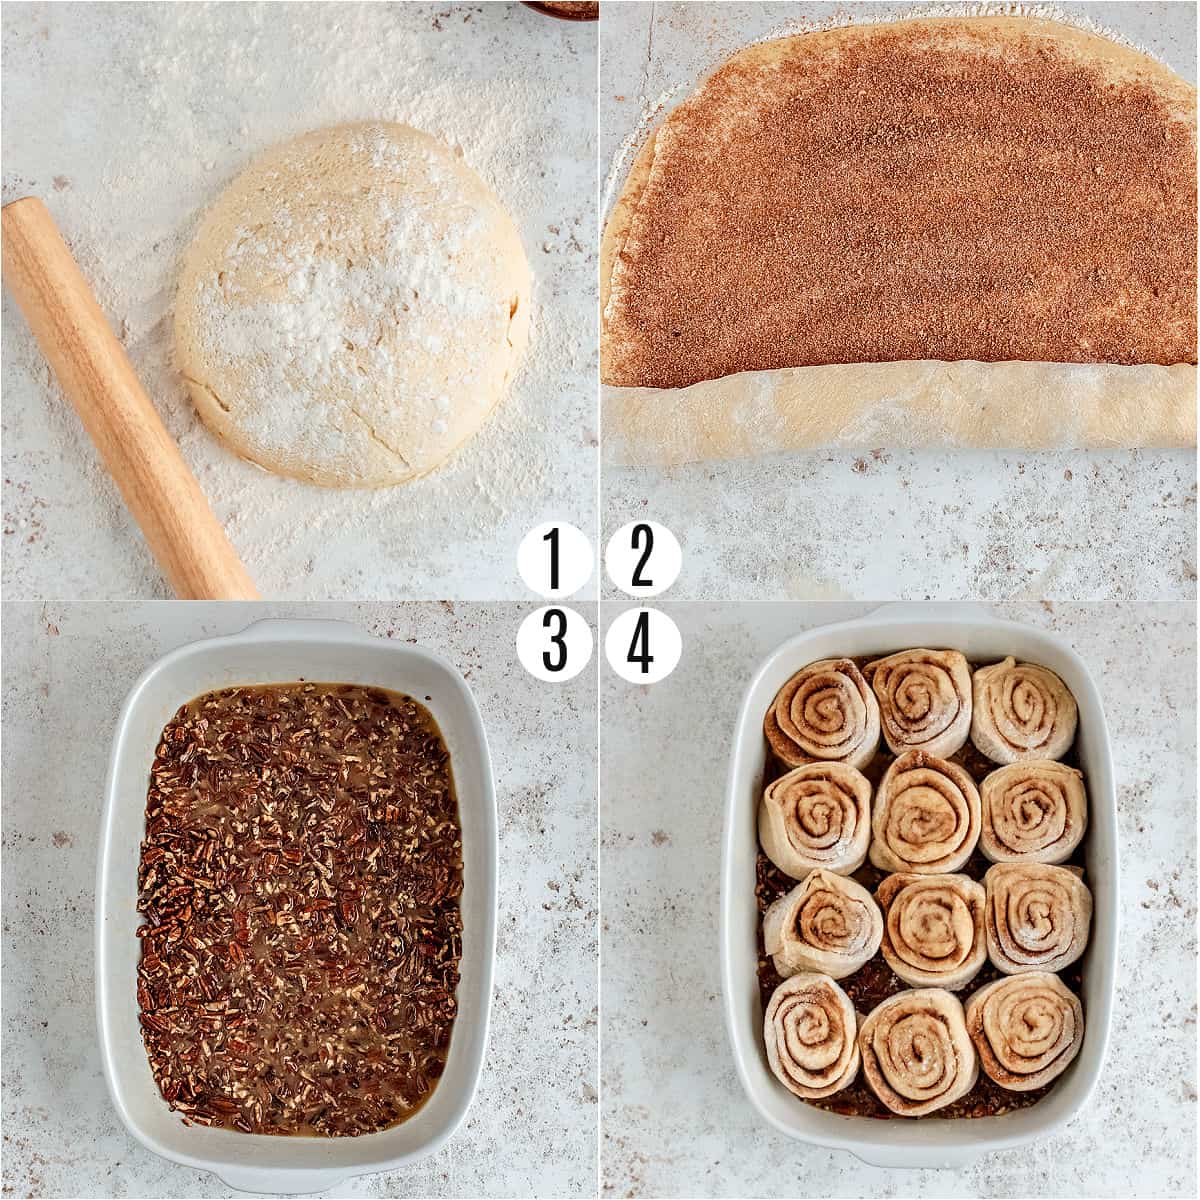 Step by step instructions showing how to make pecan sticky buns.